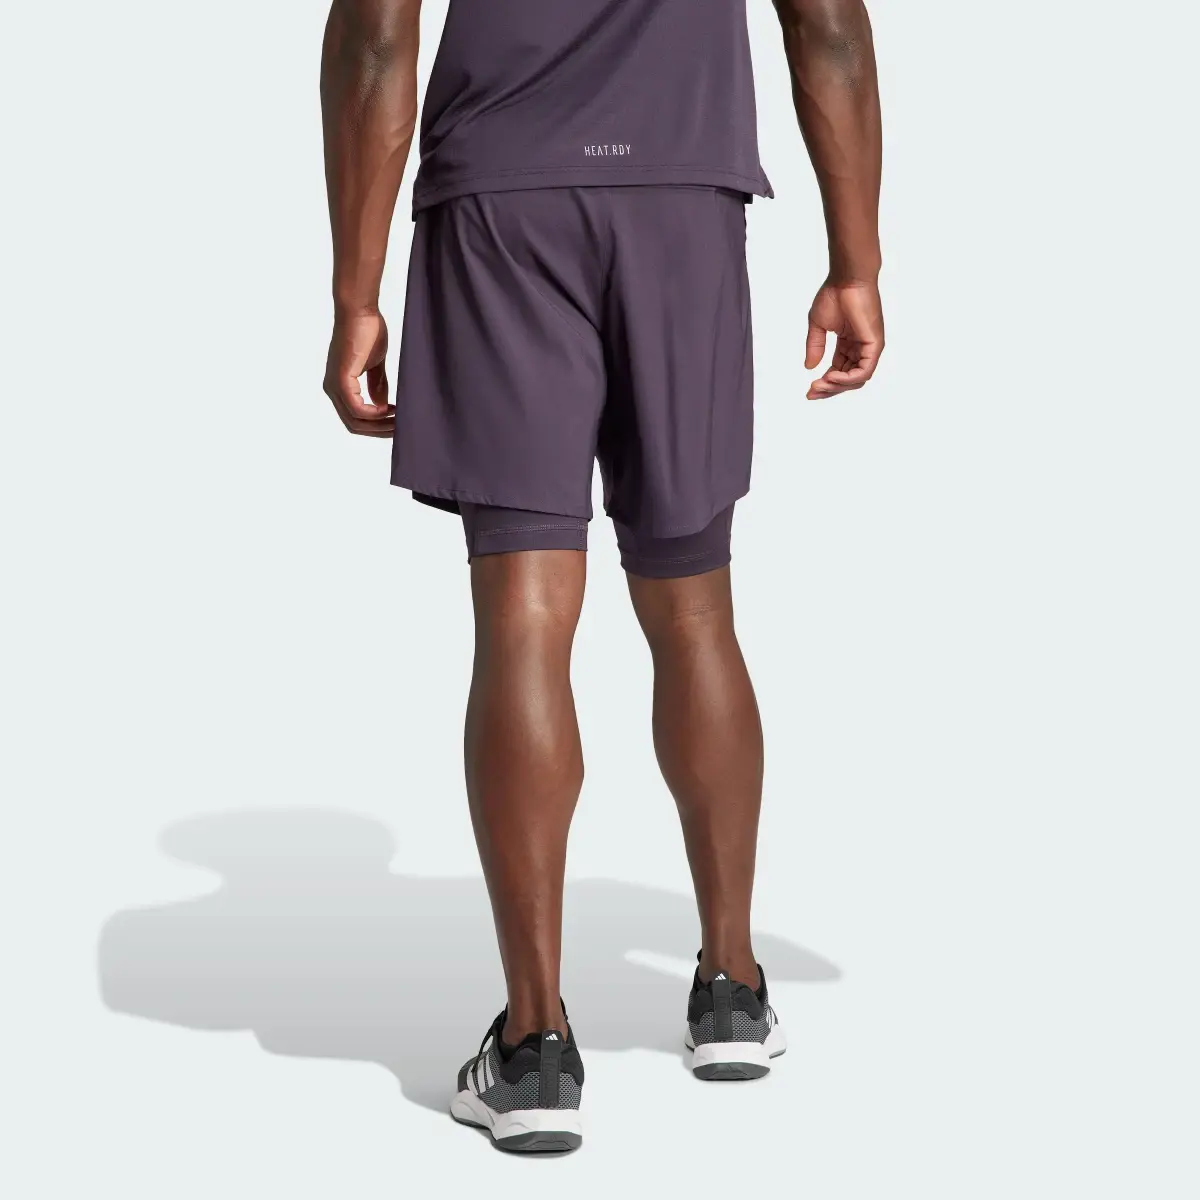 Adidas HIIT Workout HEAT.RDY 2-in-1 Shorts. 2